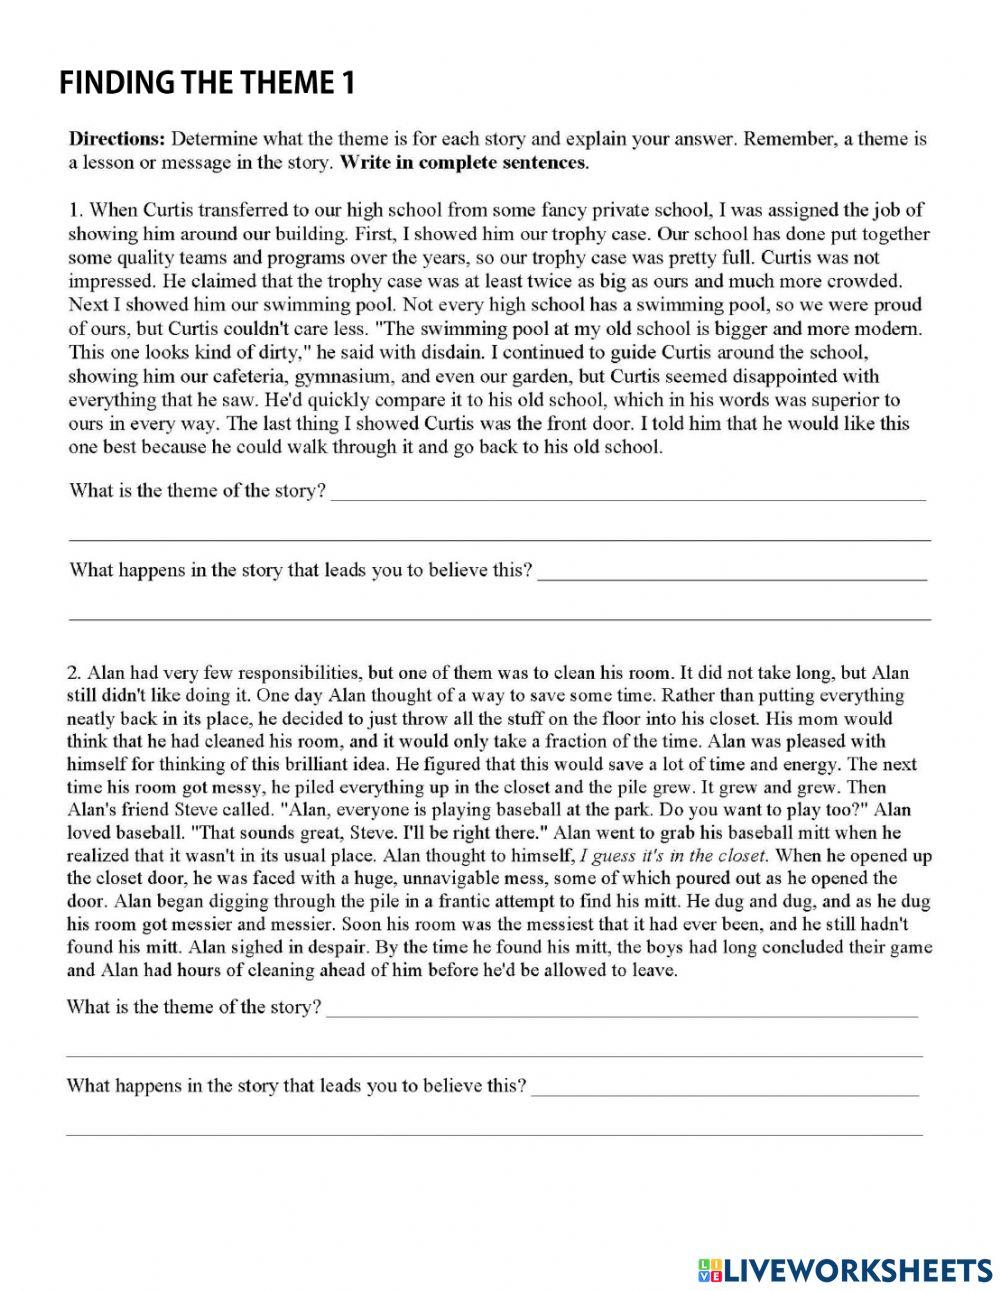 Finding the theme 1 worksheet | Live Worksheets